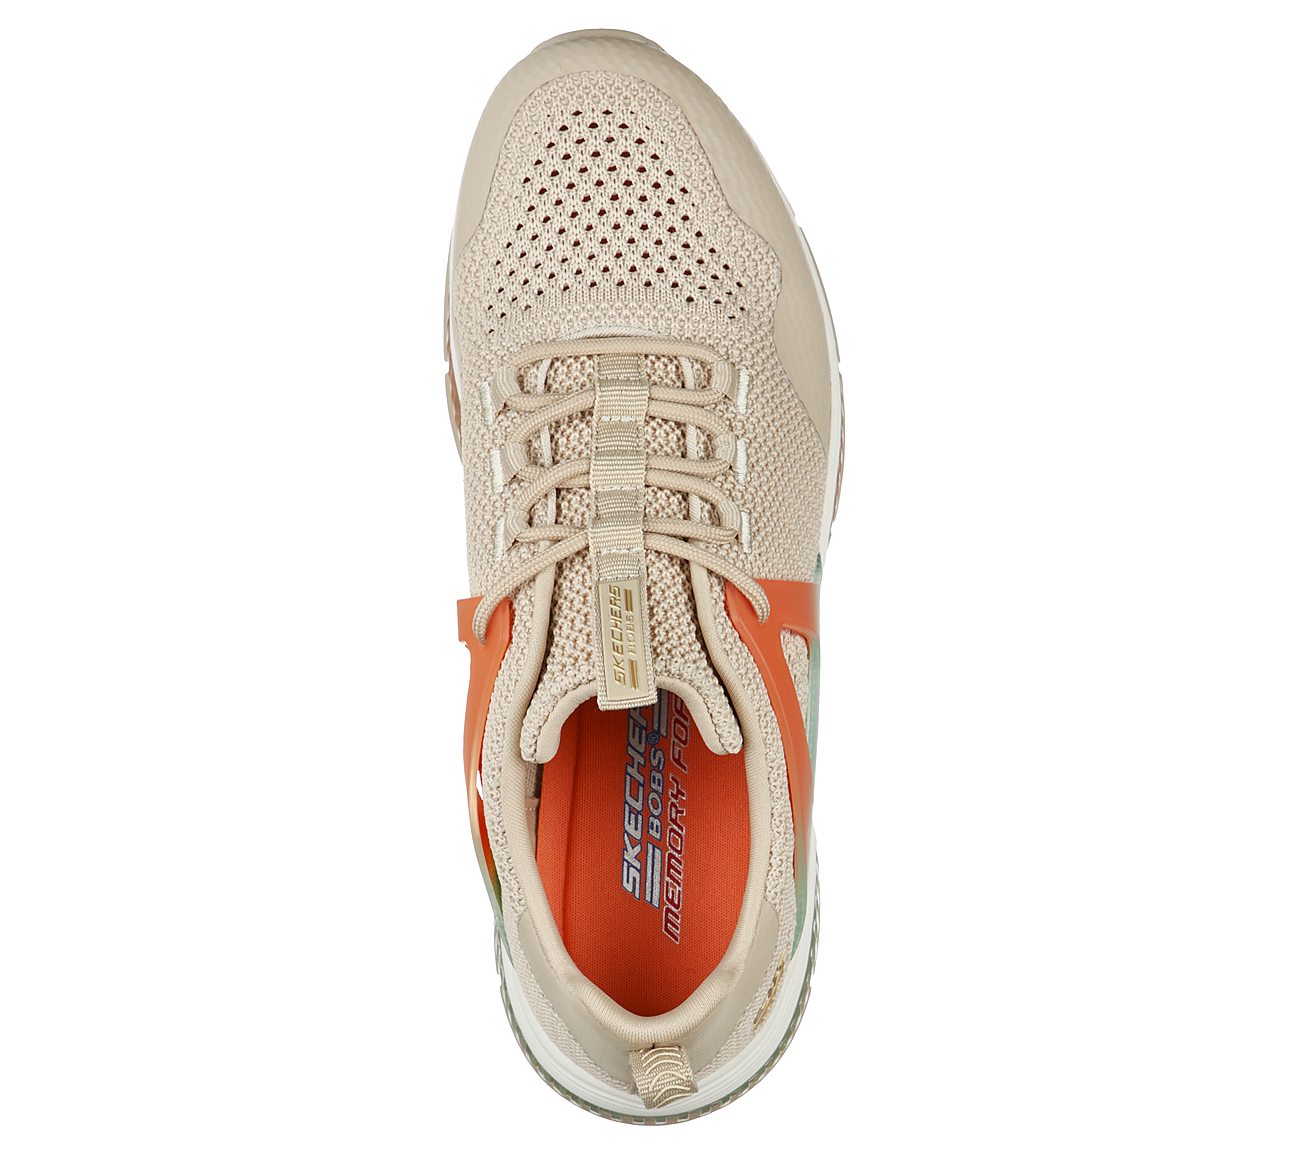 BOBS GAMMA - TIME CHASE, NATURAL Footwear Top View